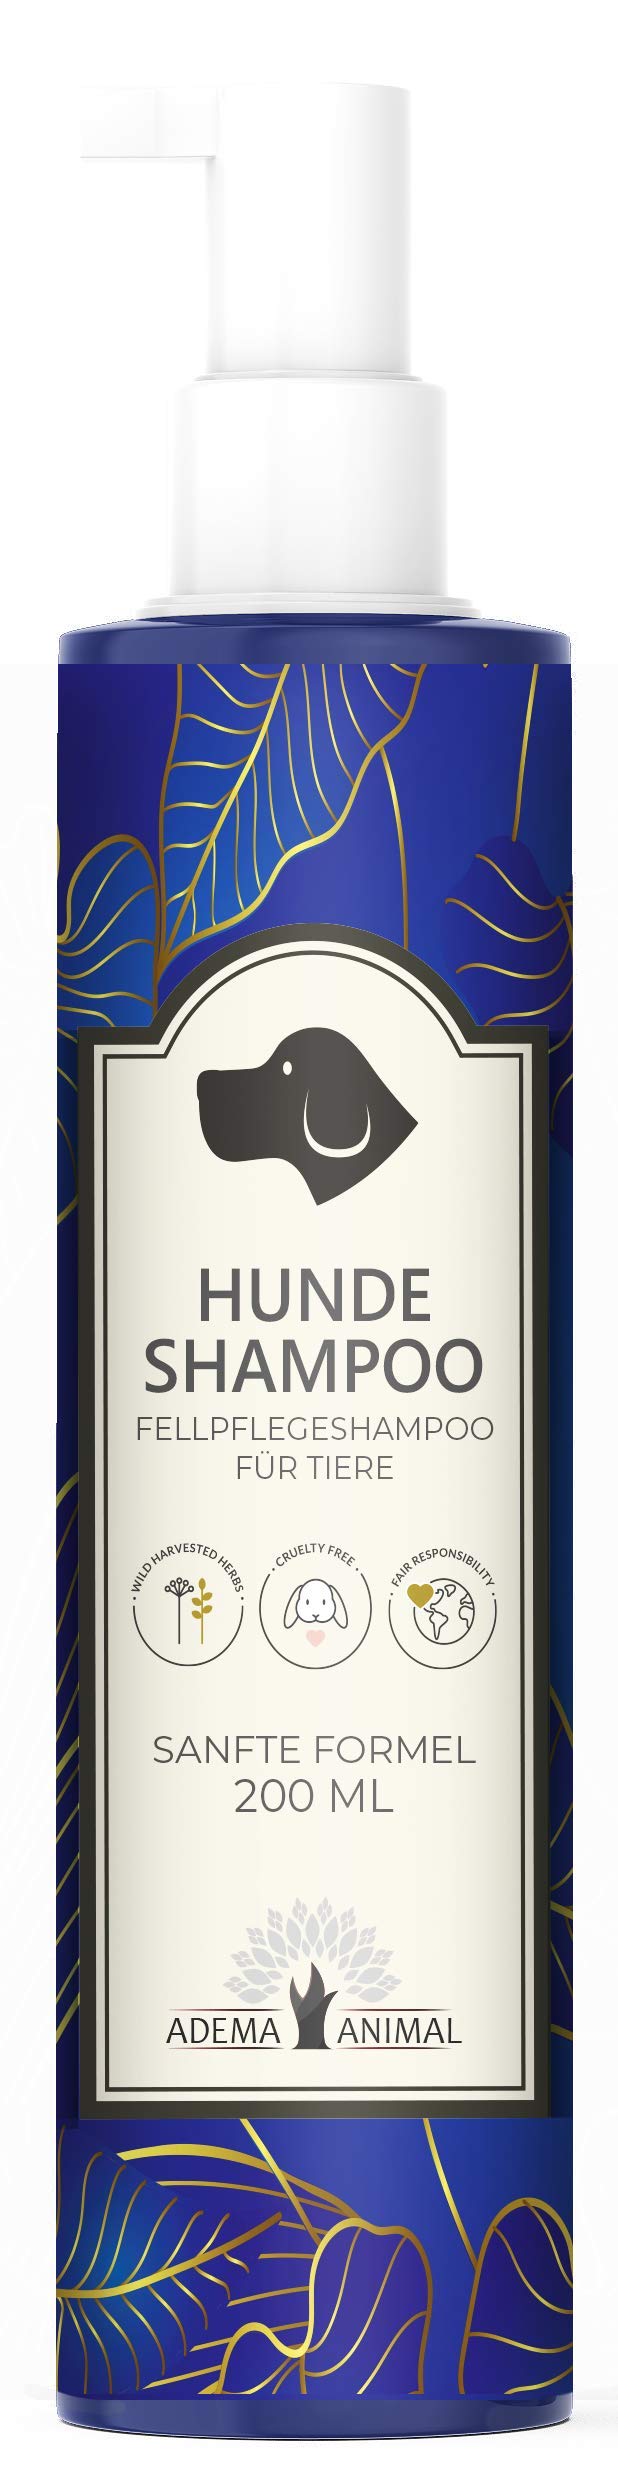 Adema Animal® dog shampoo - shampoo for dogs and puppies long-haired and short-haired against itching - for smell of fur or change of fur - mites - fleas - lice - fungus - vegan - PawsPlanet Australia